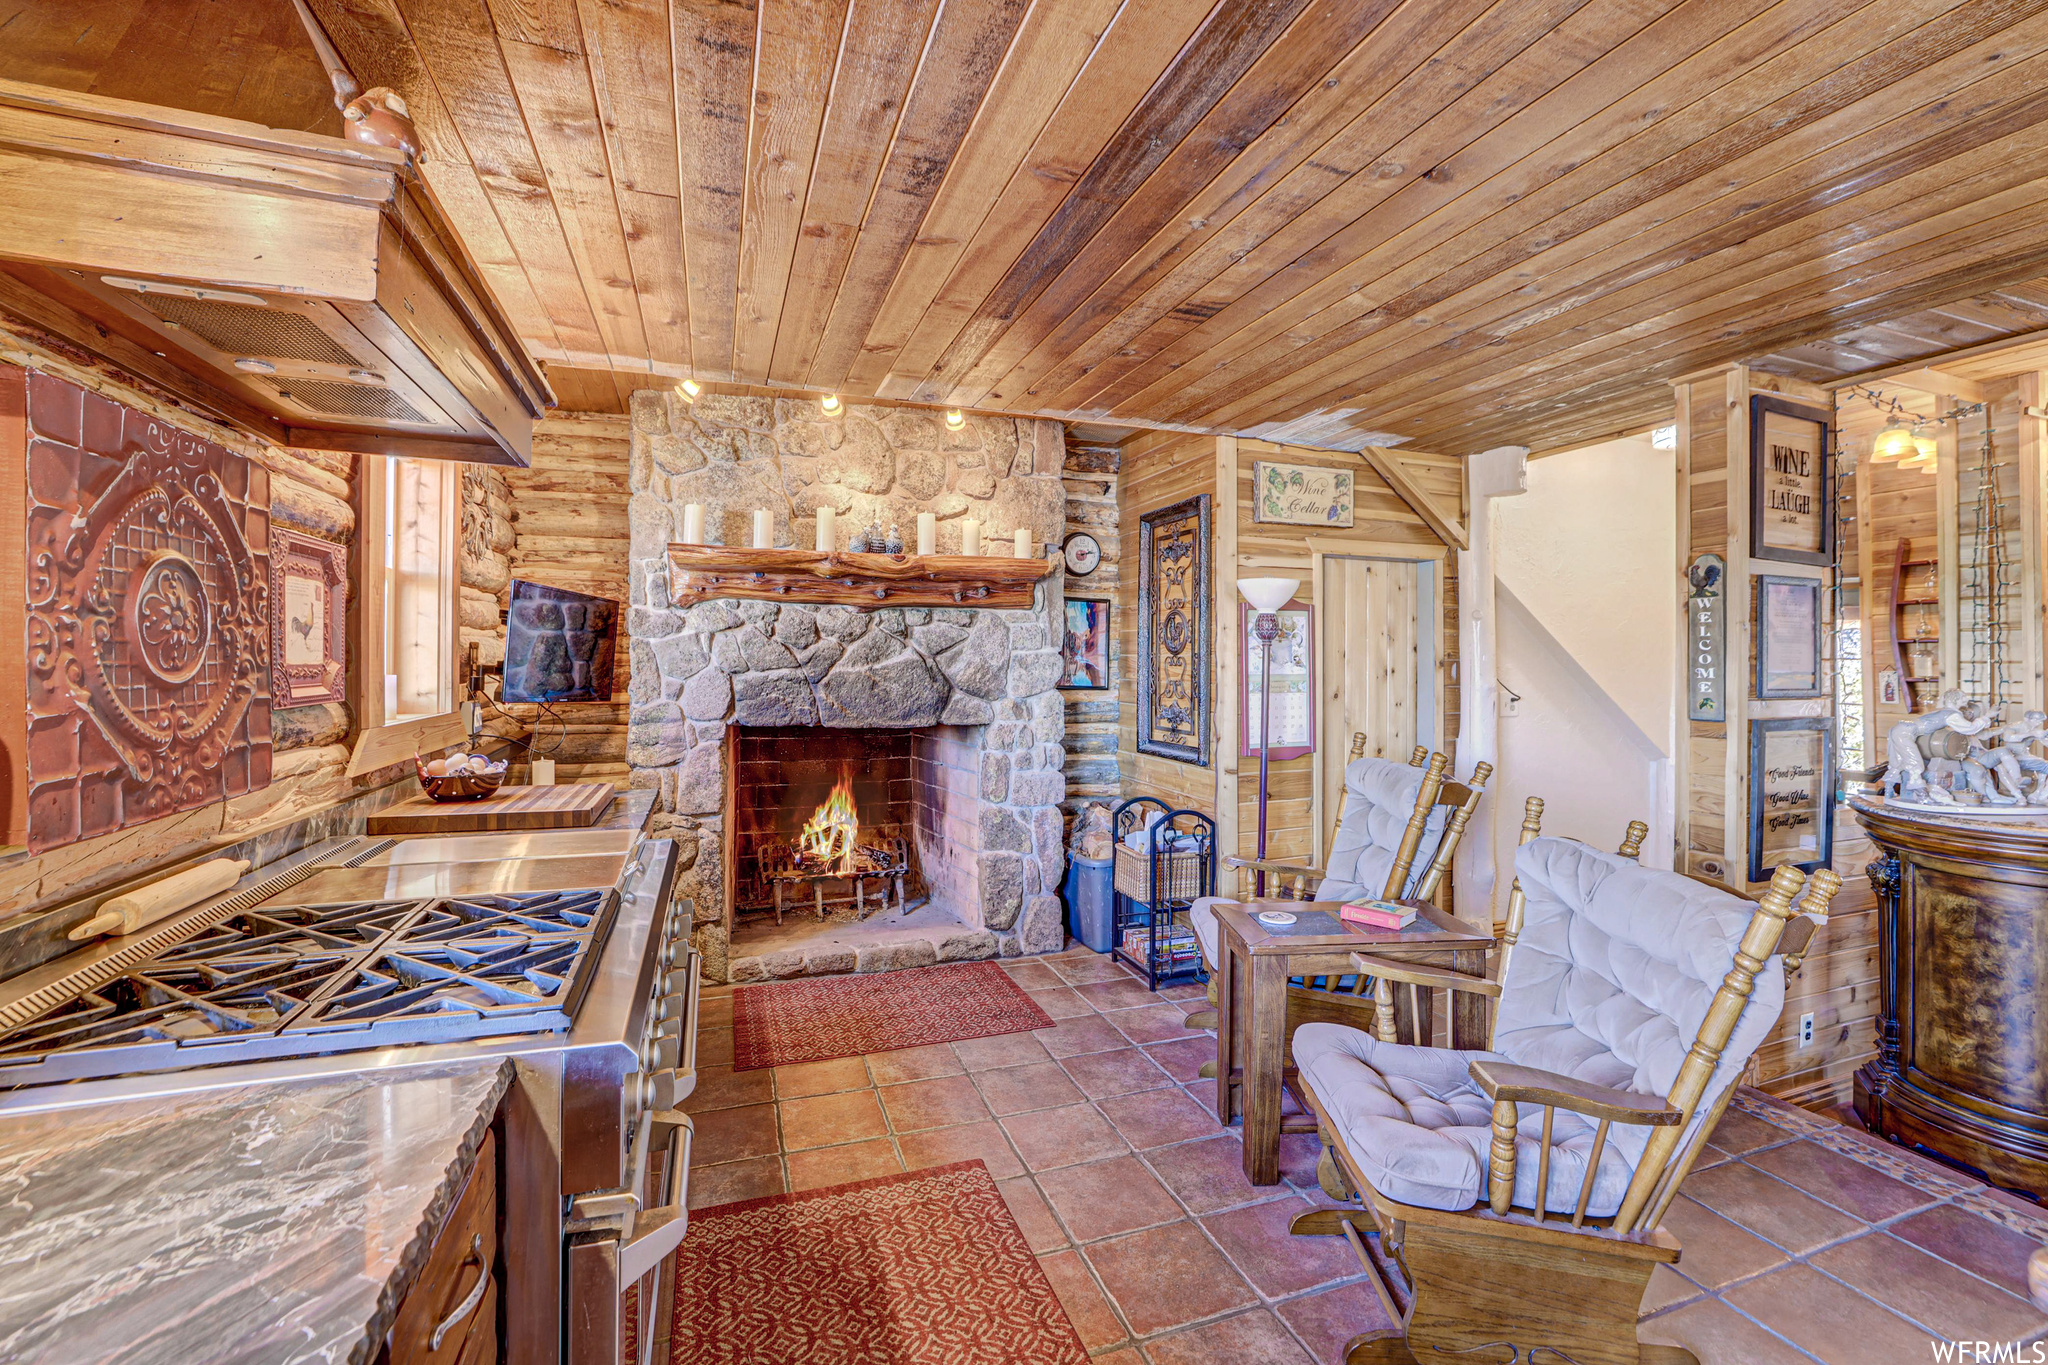 Kitchen featuring wood ceiling, rustic walls, tile flooring, a stone fireplace, and double oven range